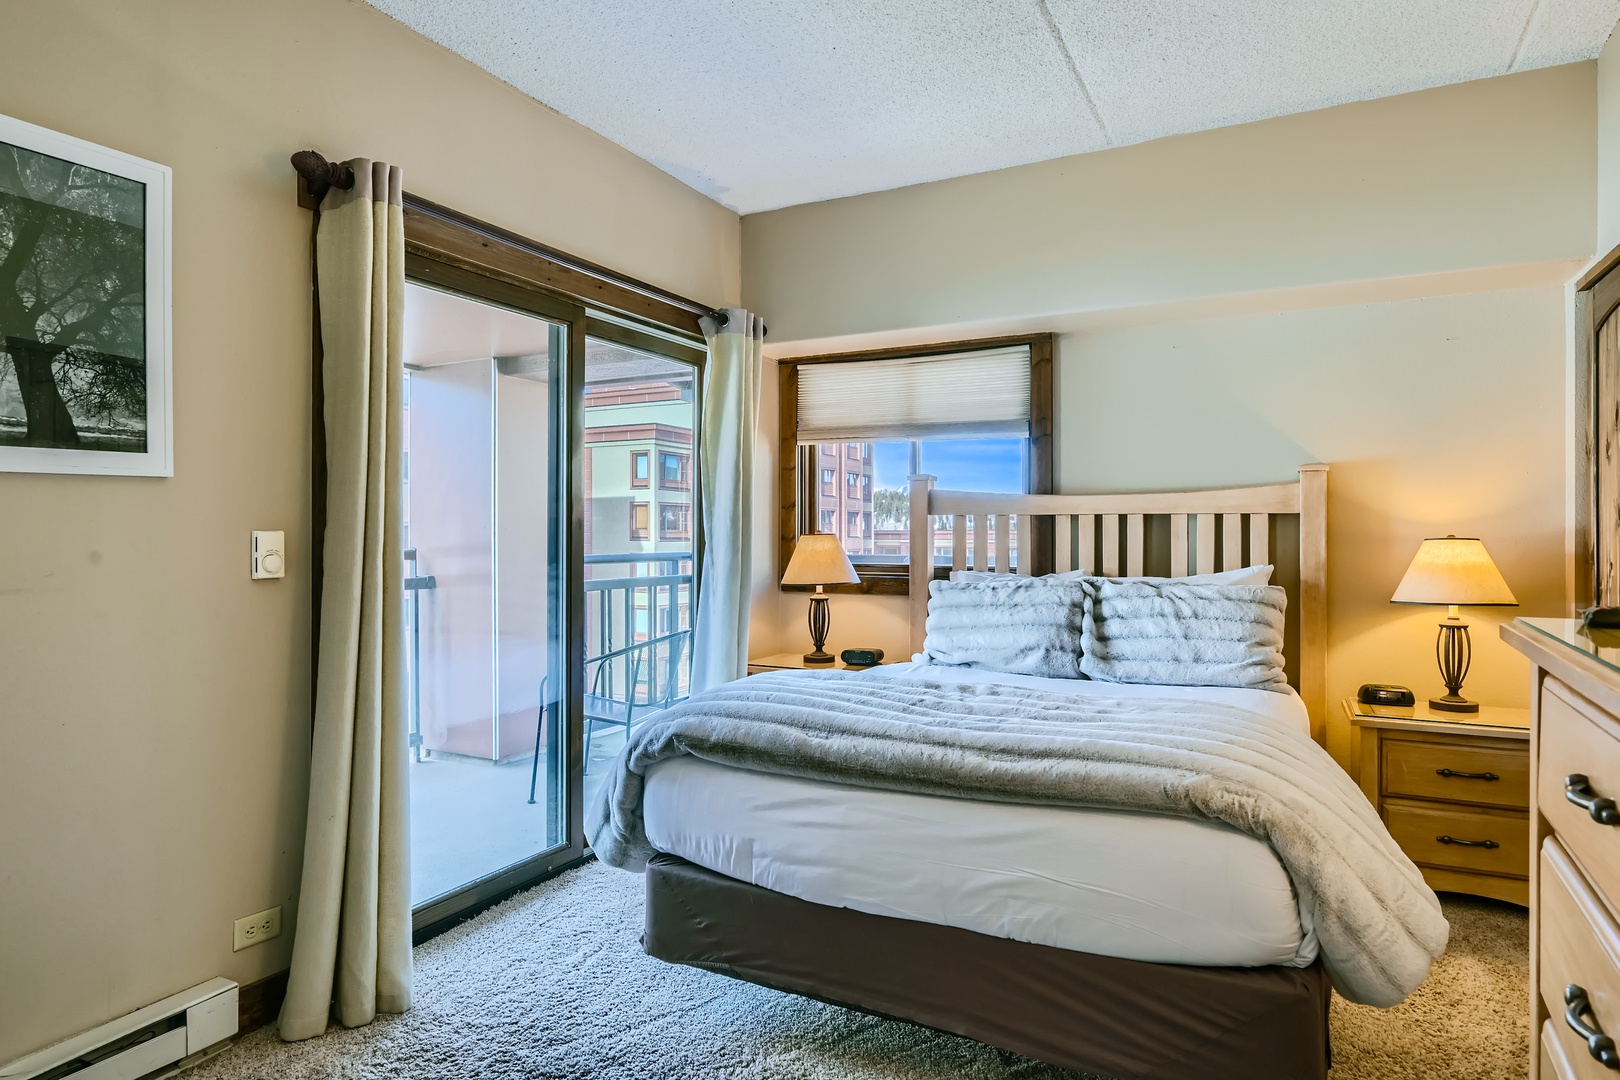 The private bedroom features a plush queen bed & stunning balcony views